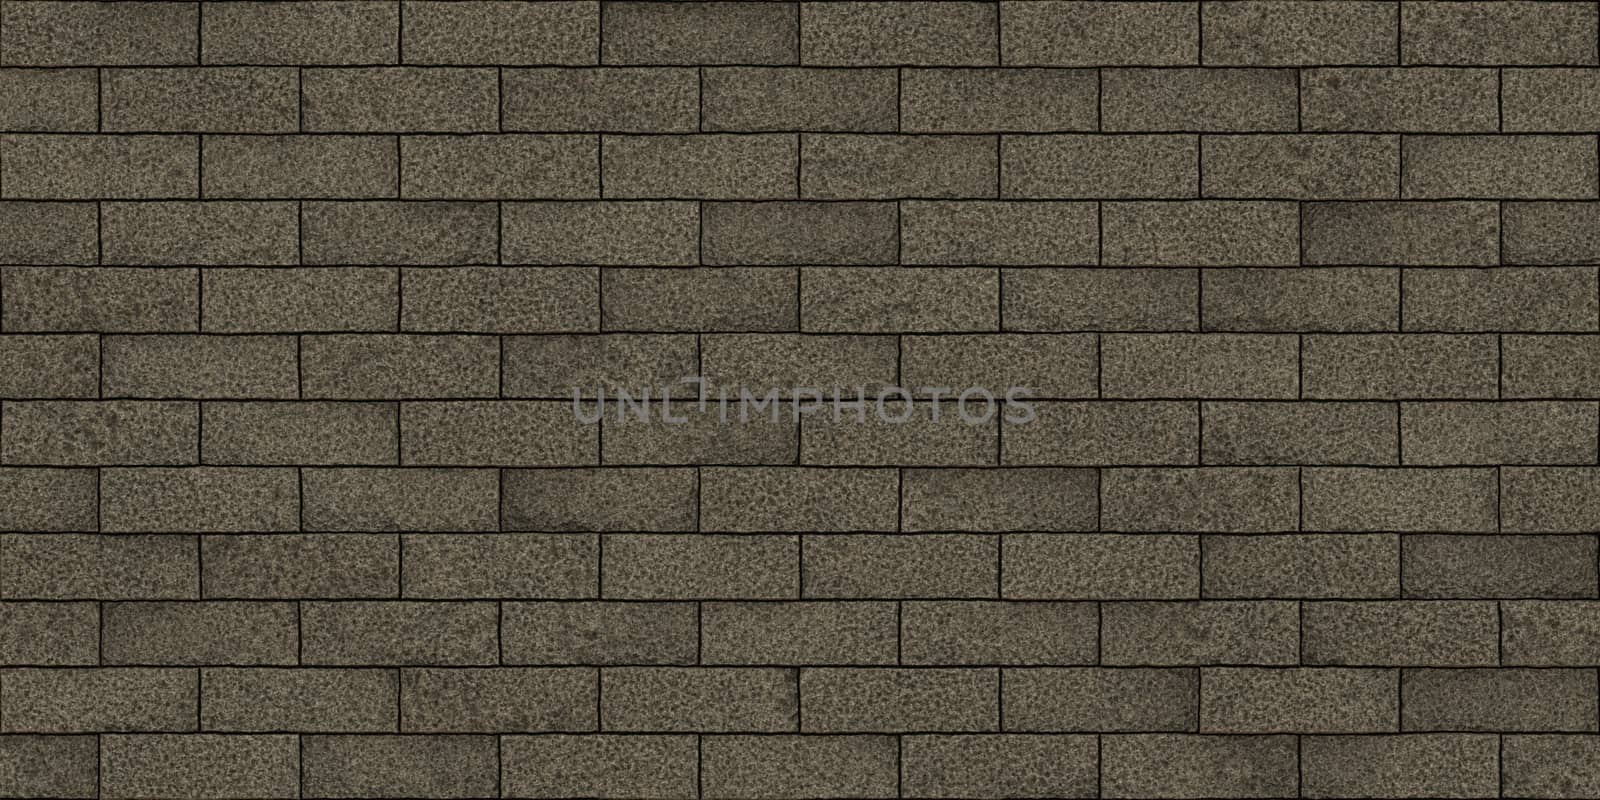 Light Brown Seamless Stone Block Wall Texture. Building Facade Background. Exterior Architecture Decorative House Facing.